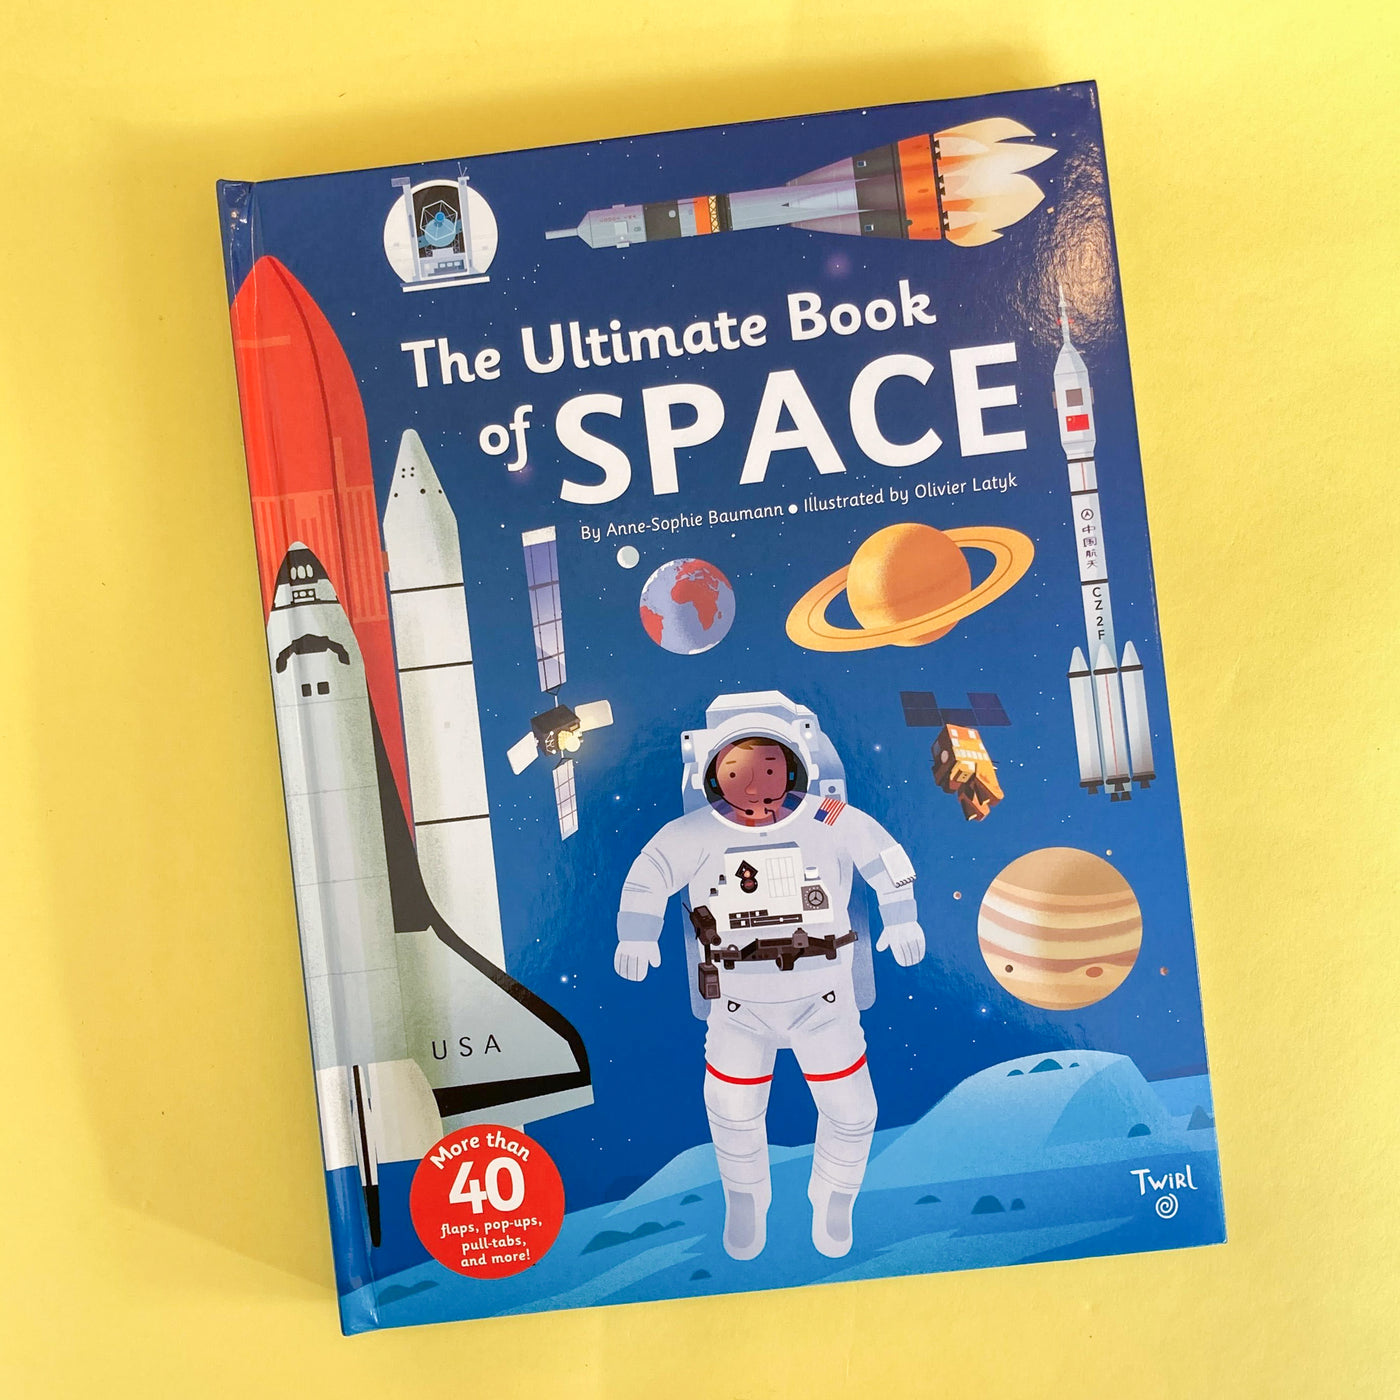 The Ultimate Book of Space by Anne-Sophie Baumann and Olivier Latyck